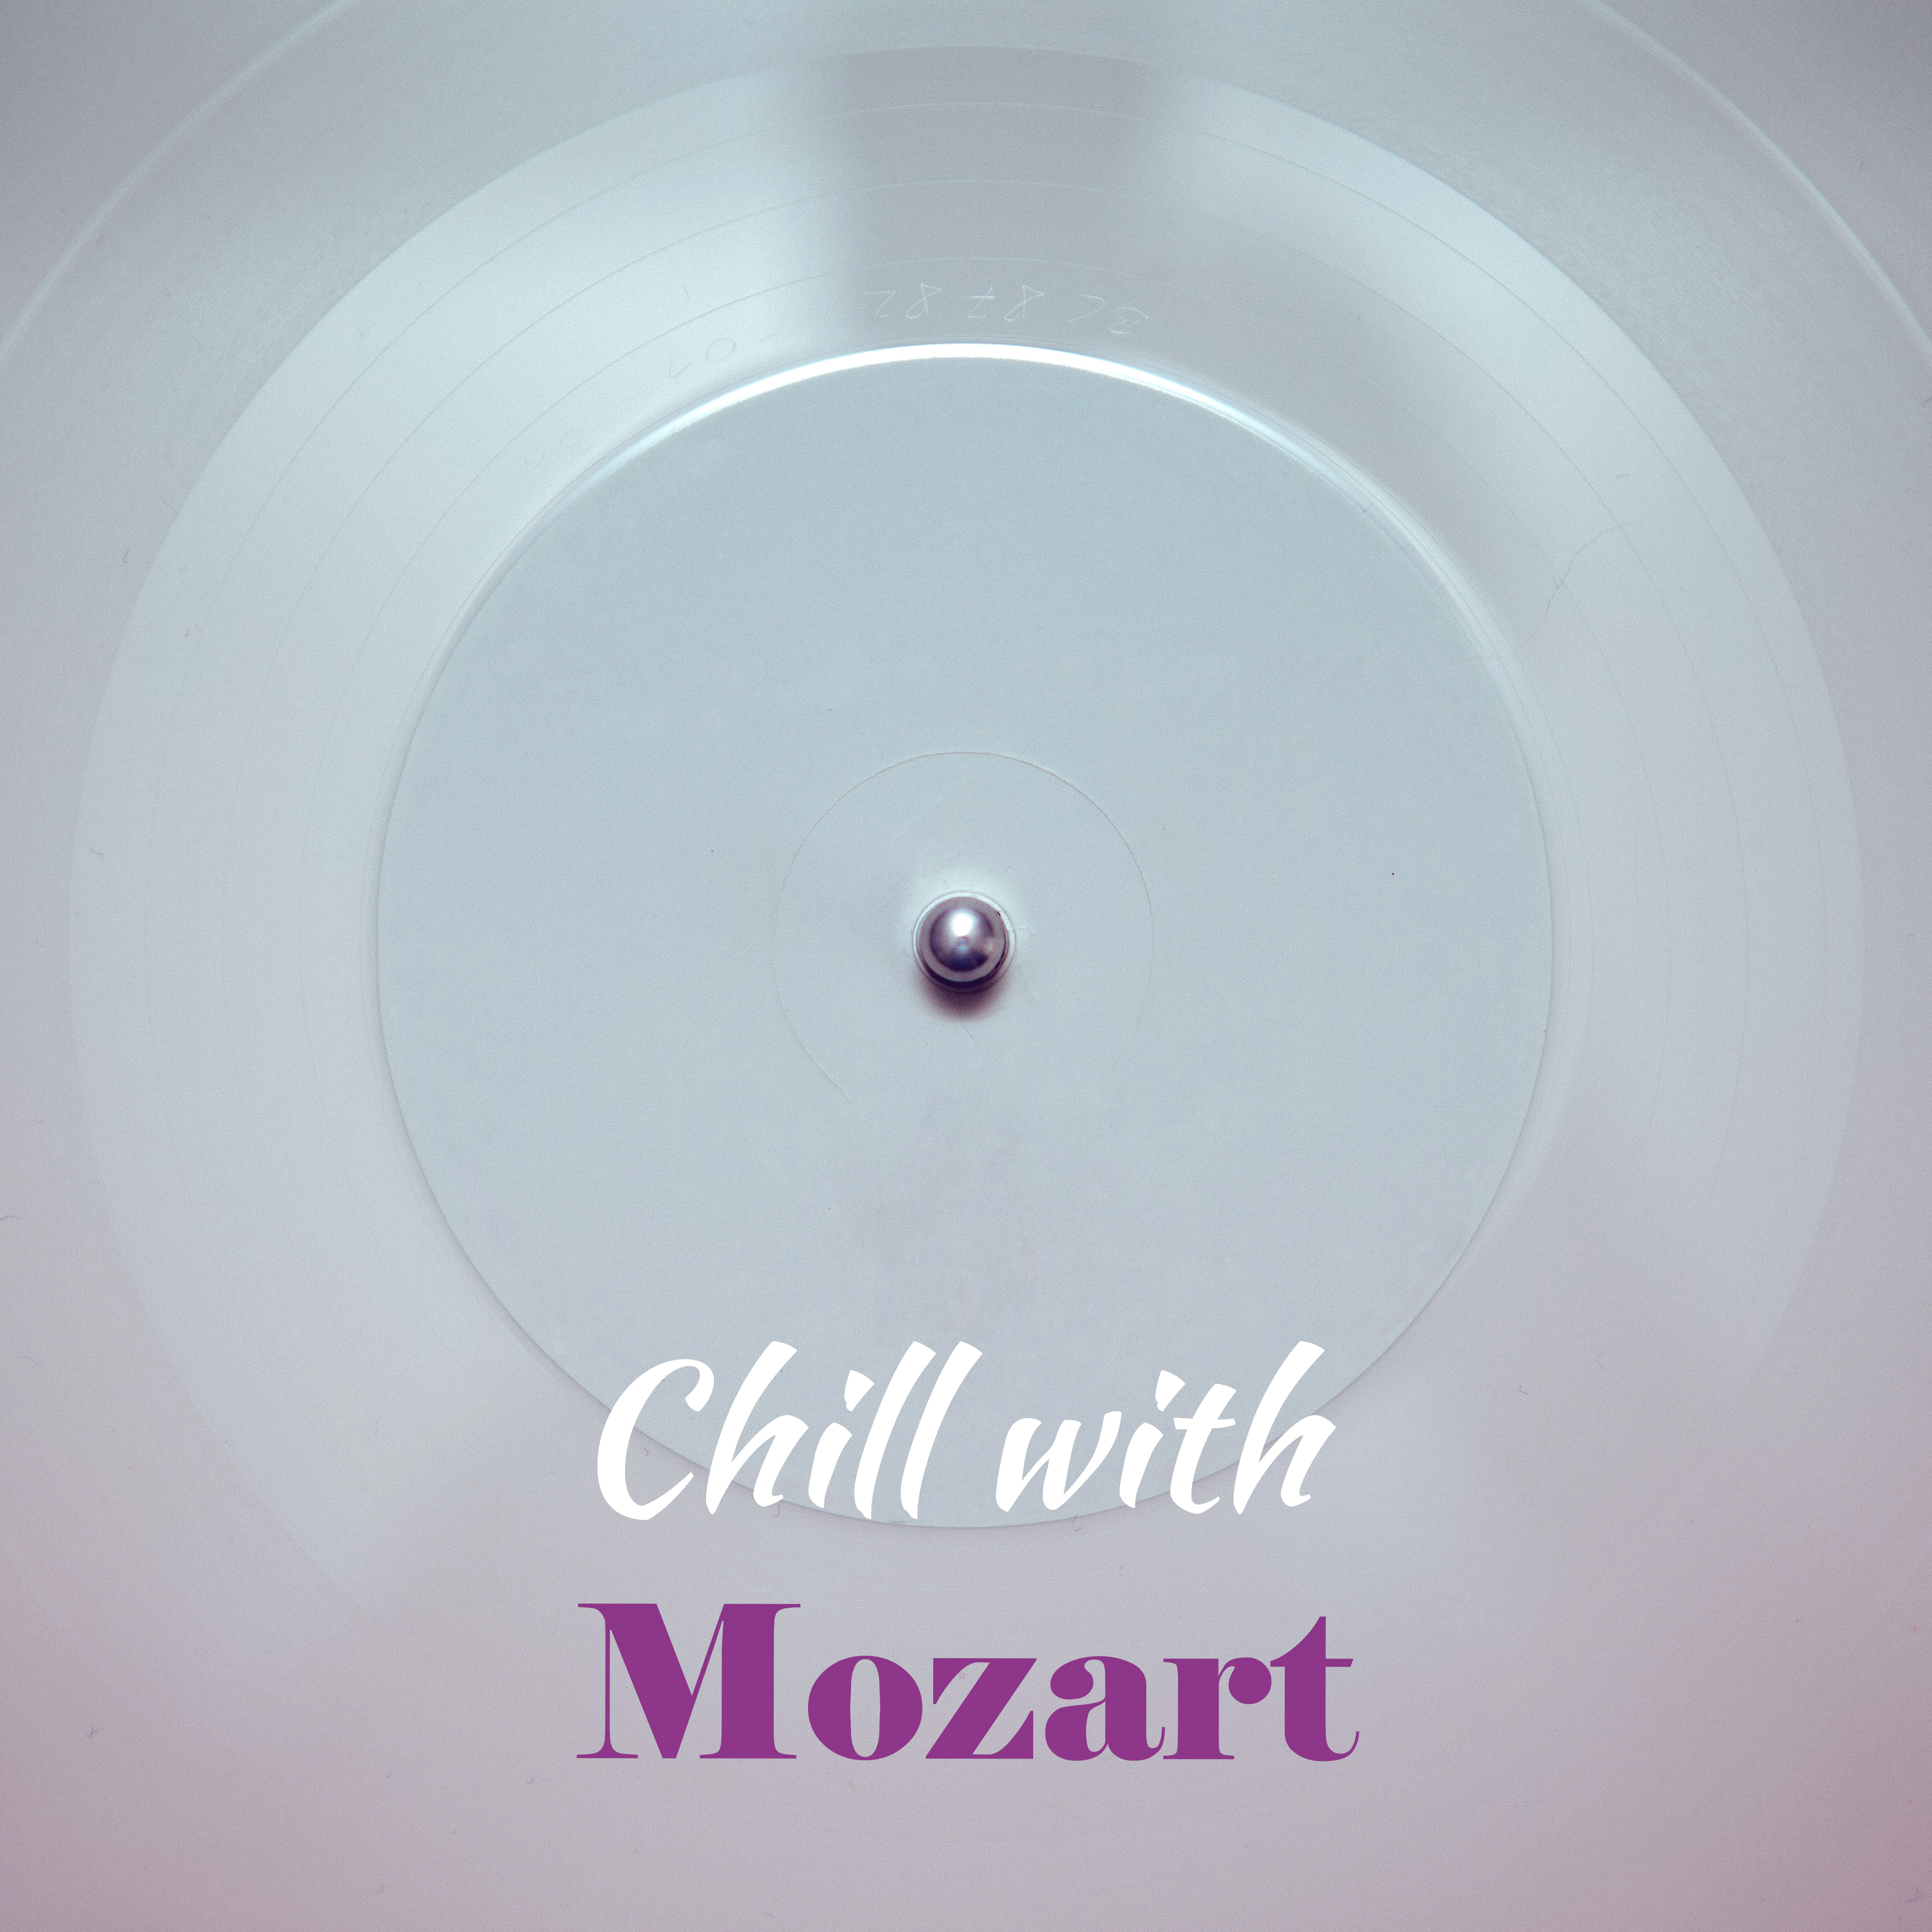 Chill with Mozart